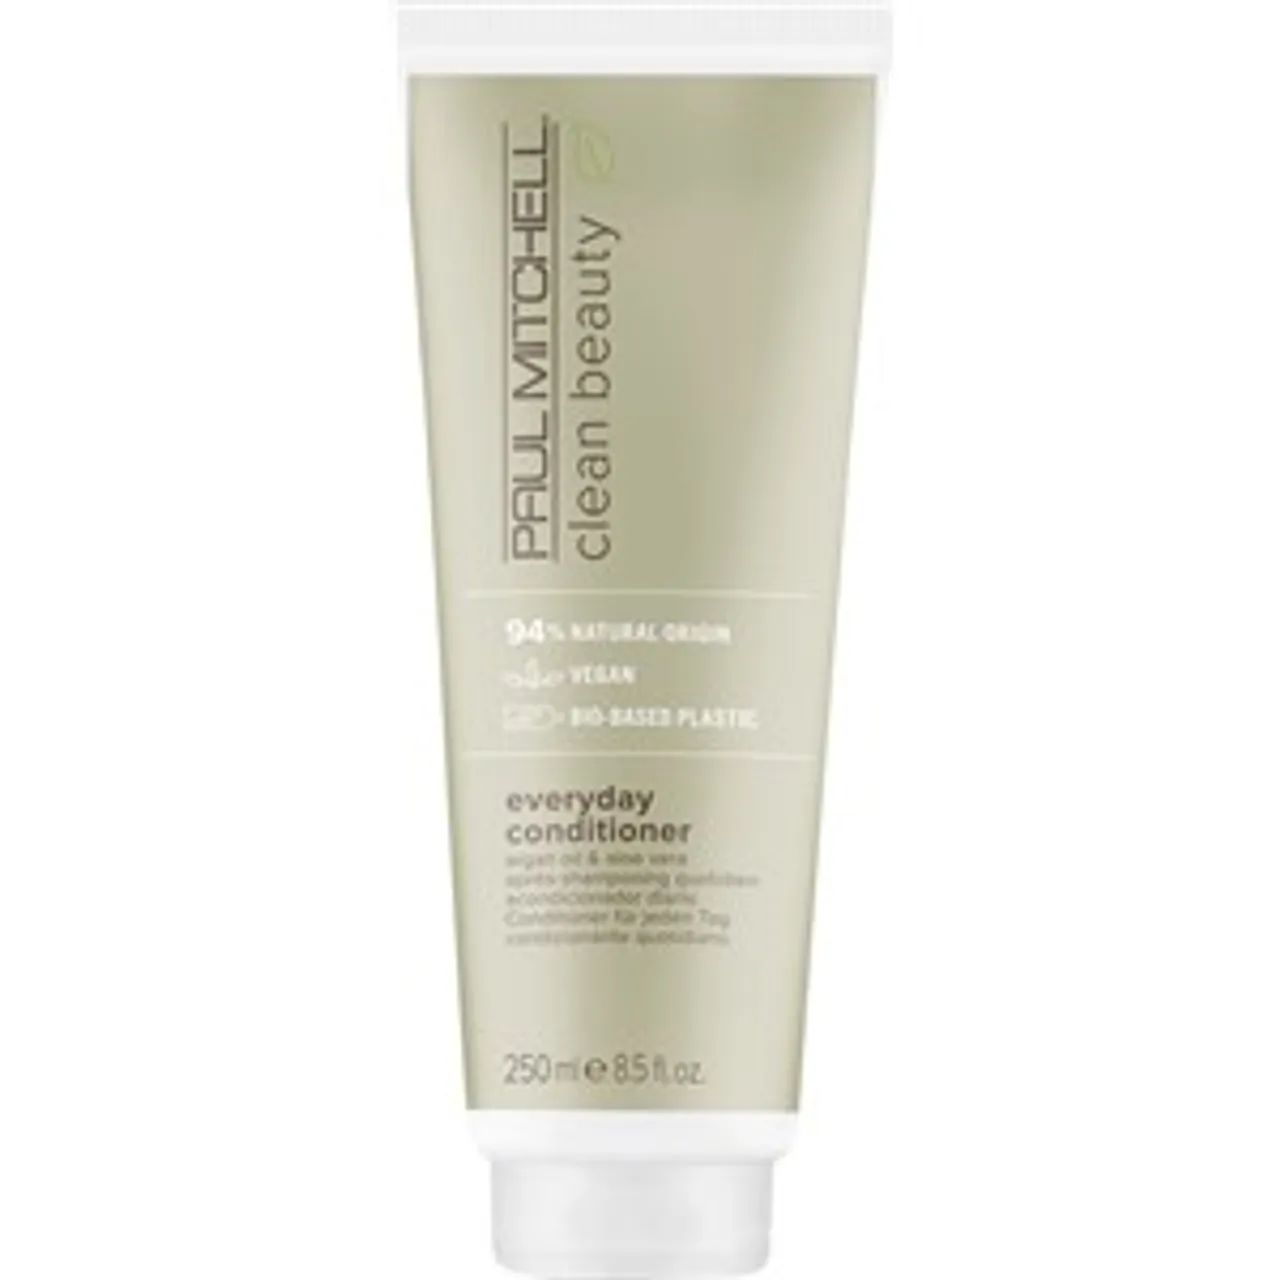 Paul Mitchell Clean Beauty Every Day Conditioner Basic Damen